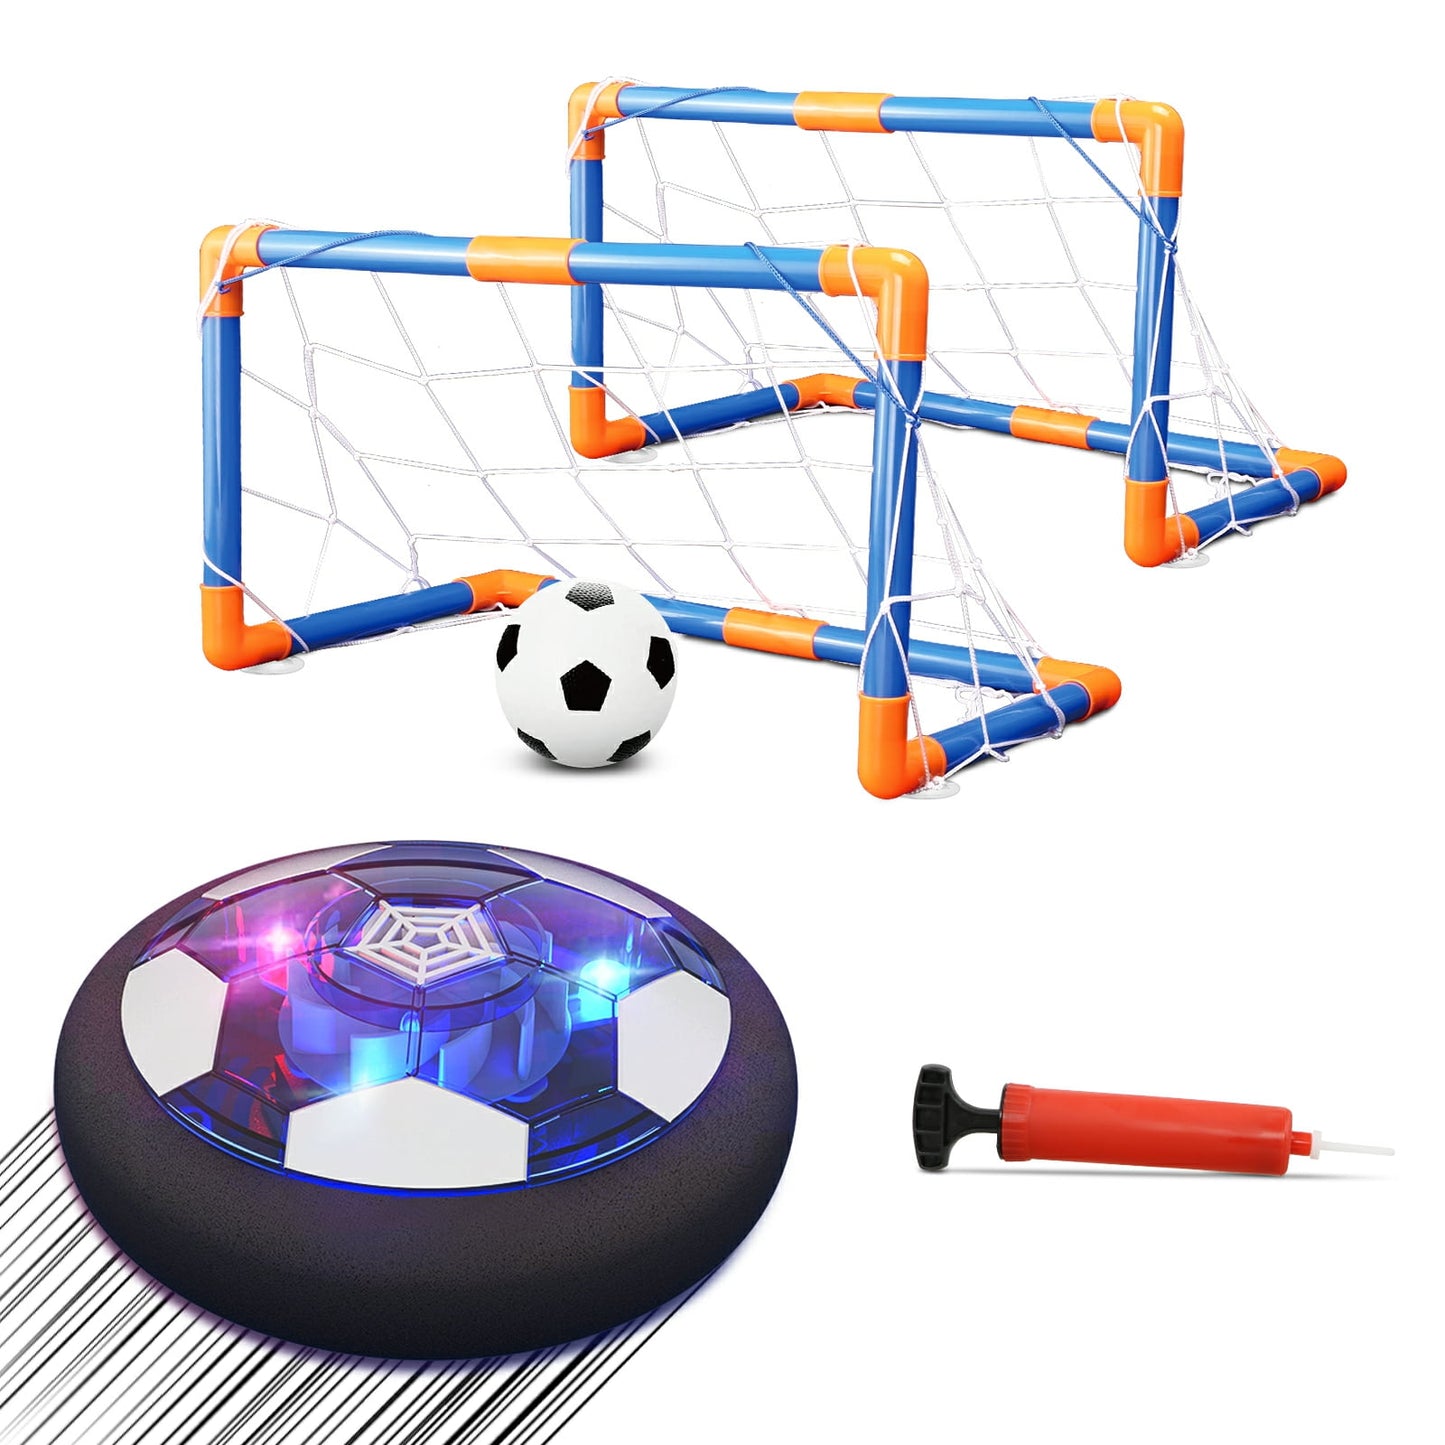 Hover Soccer Ball Set with 2 Goals, LED Rechargeable Indoor/Outdoor Games Toys for Kids Boy Girls